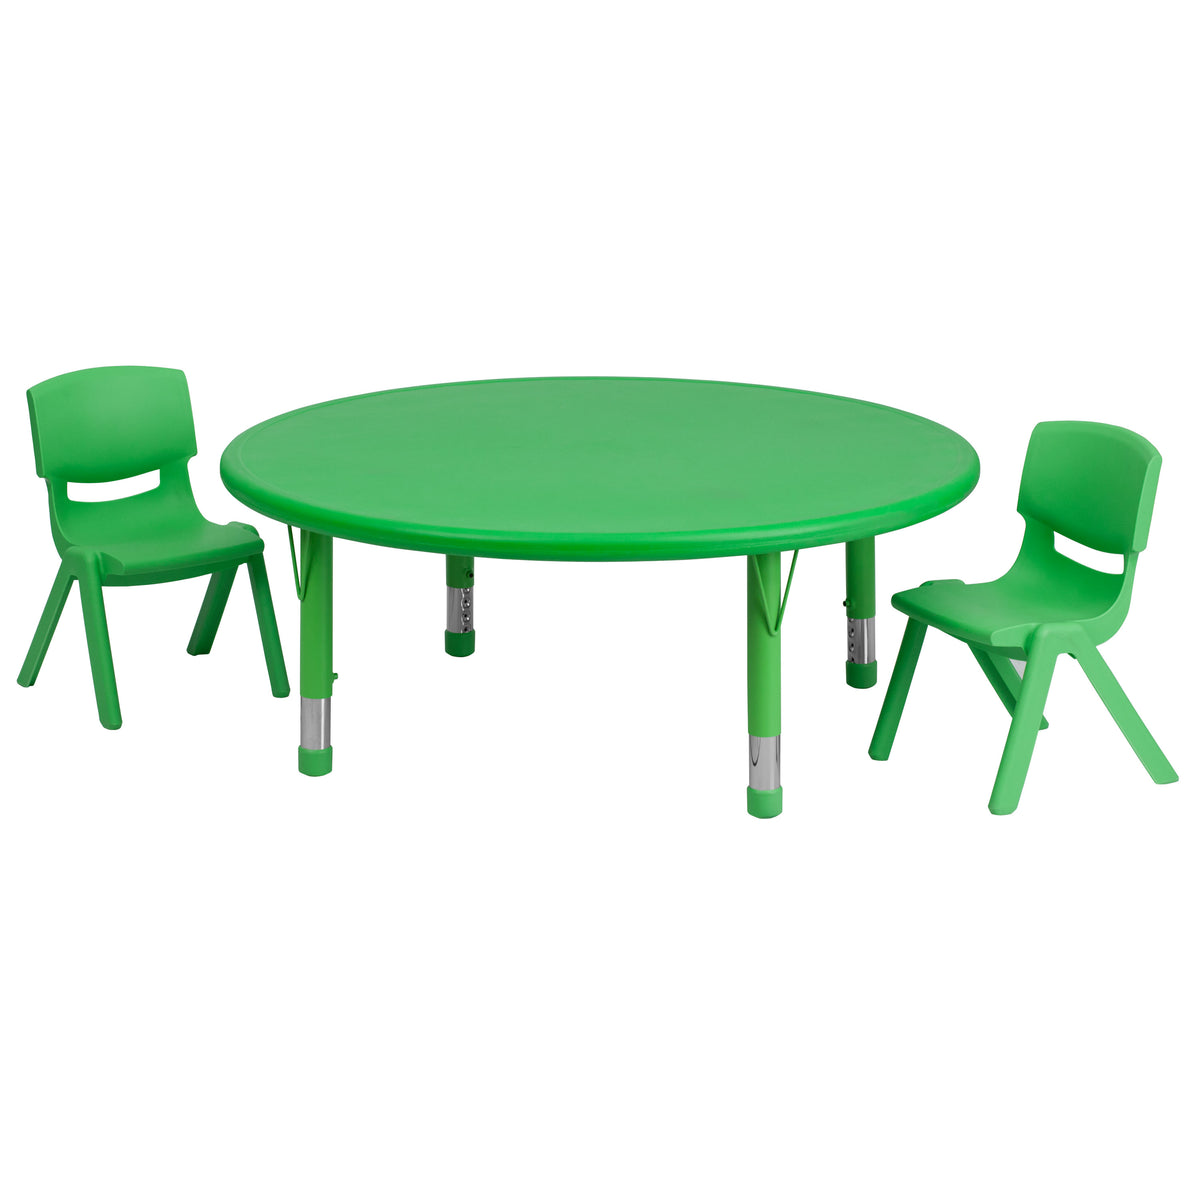 Green |#| 45inch Round Green Plastic Height Adjustable Activity Table Set with 2 Chairs